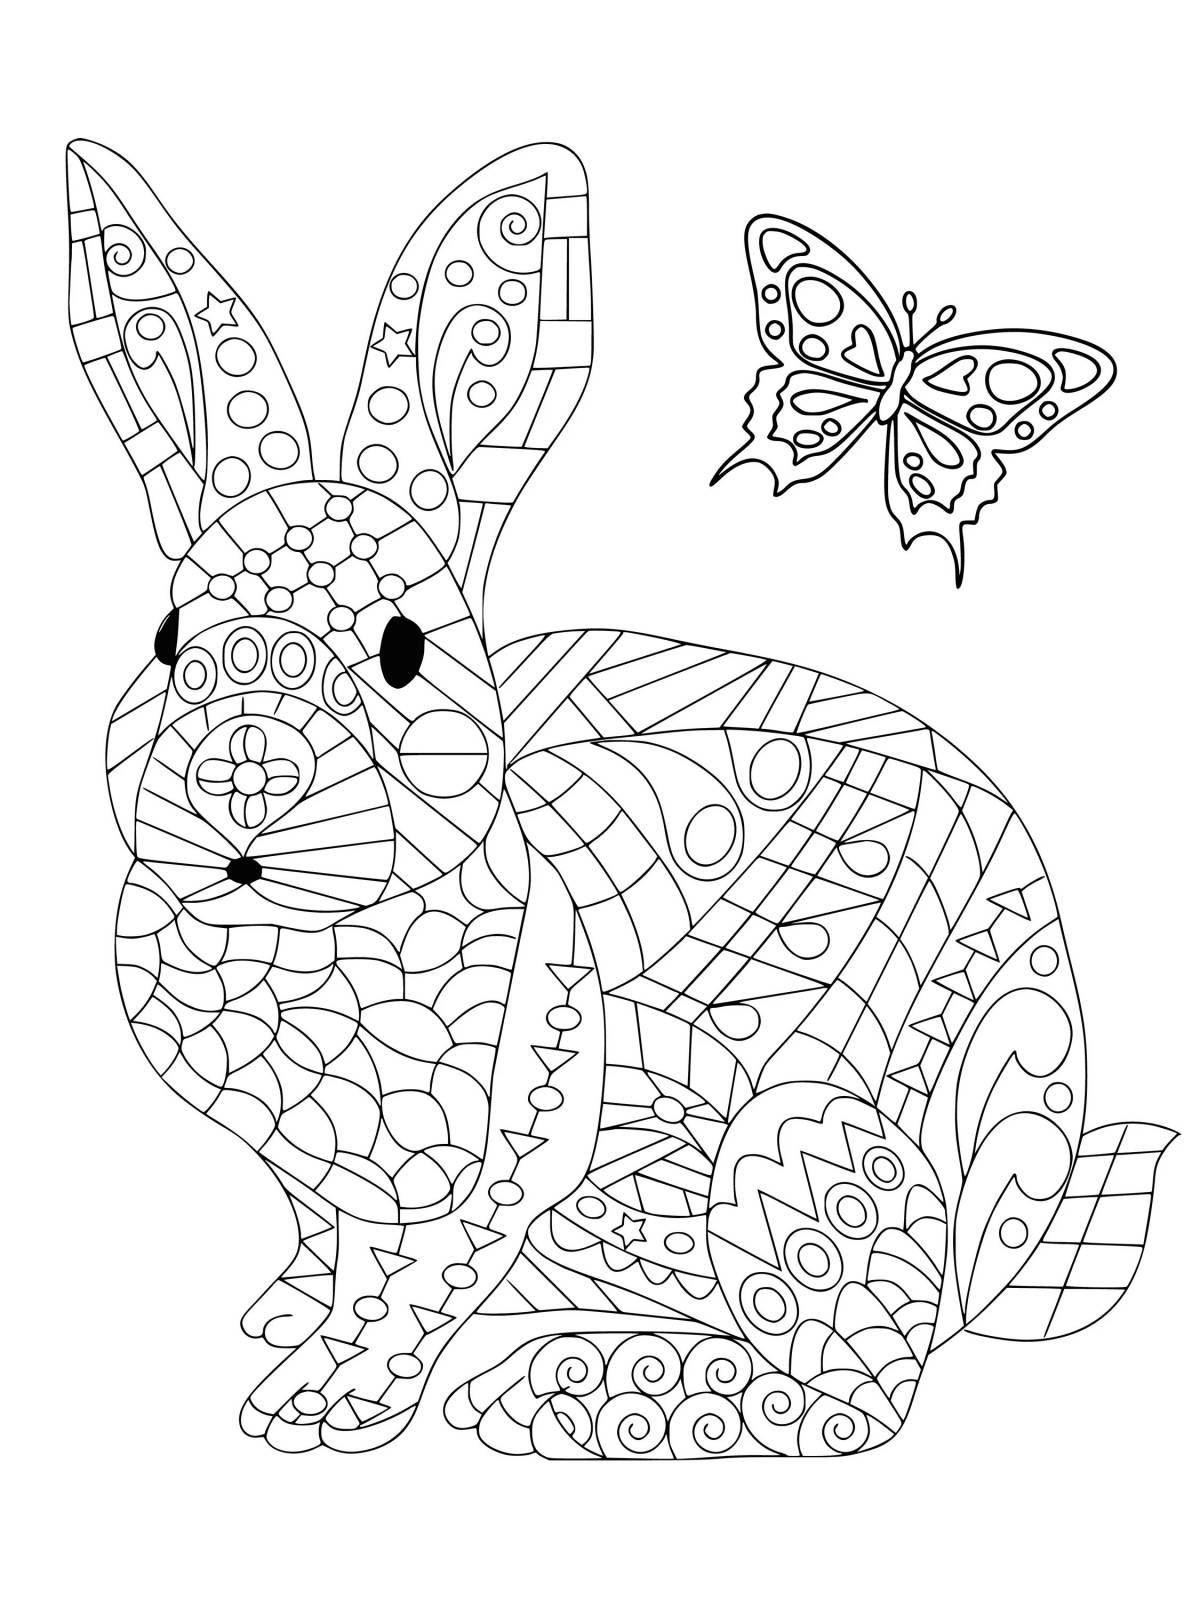 Exquisite coloring bunny antistress